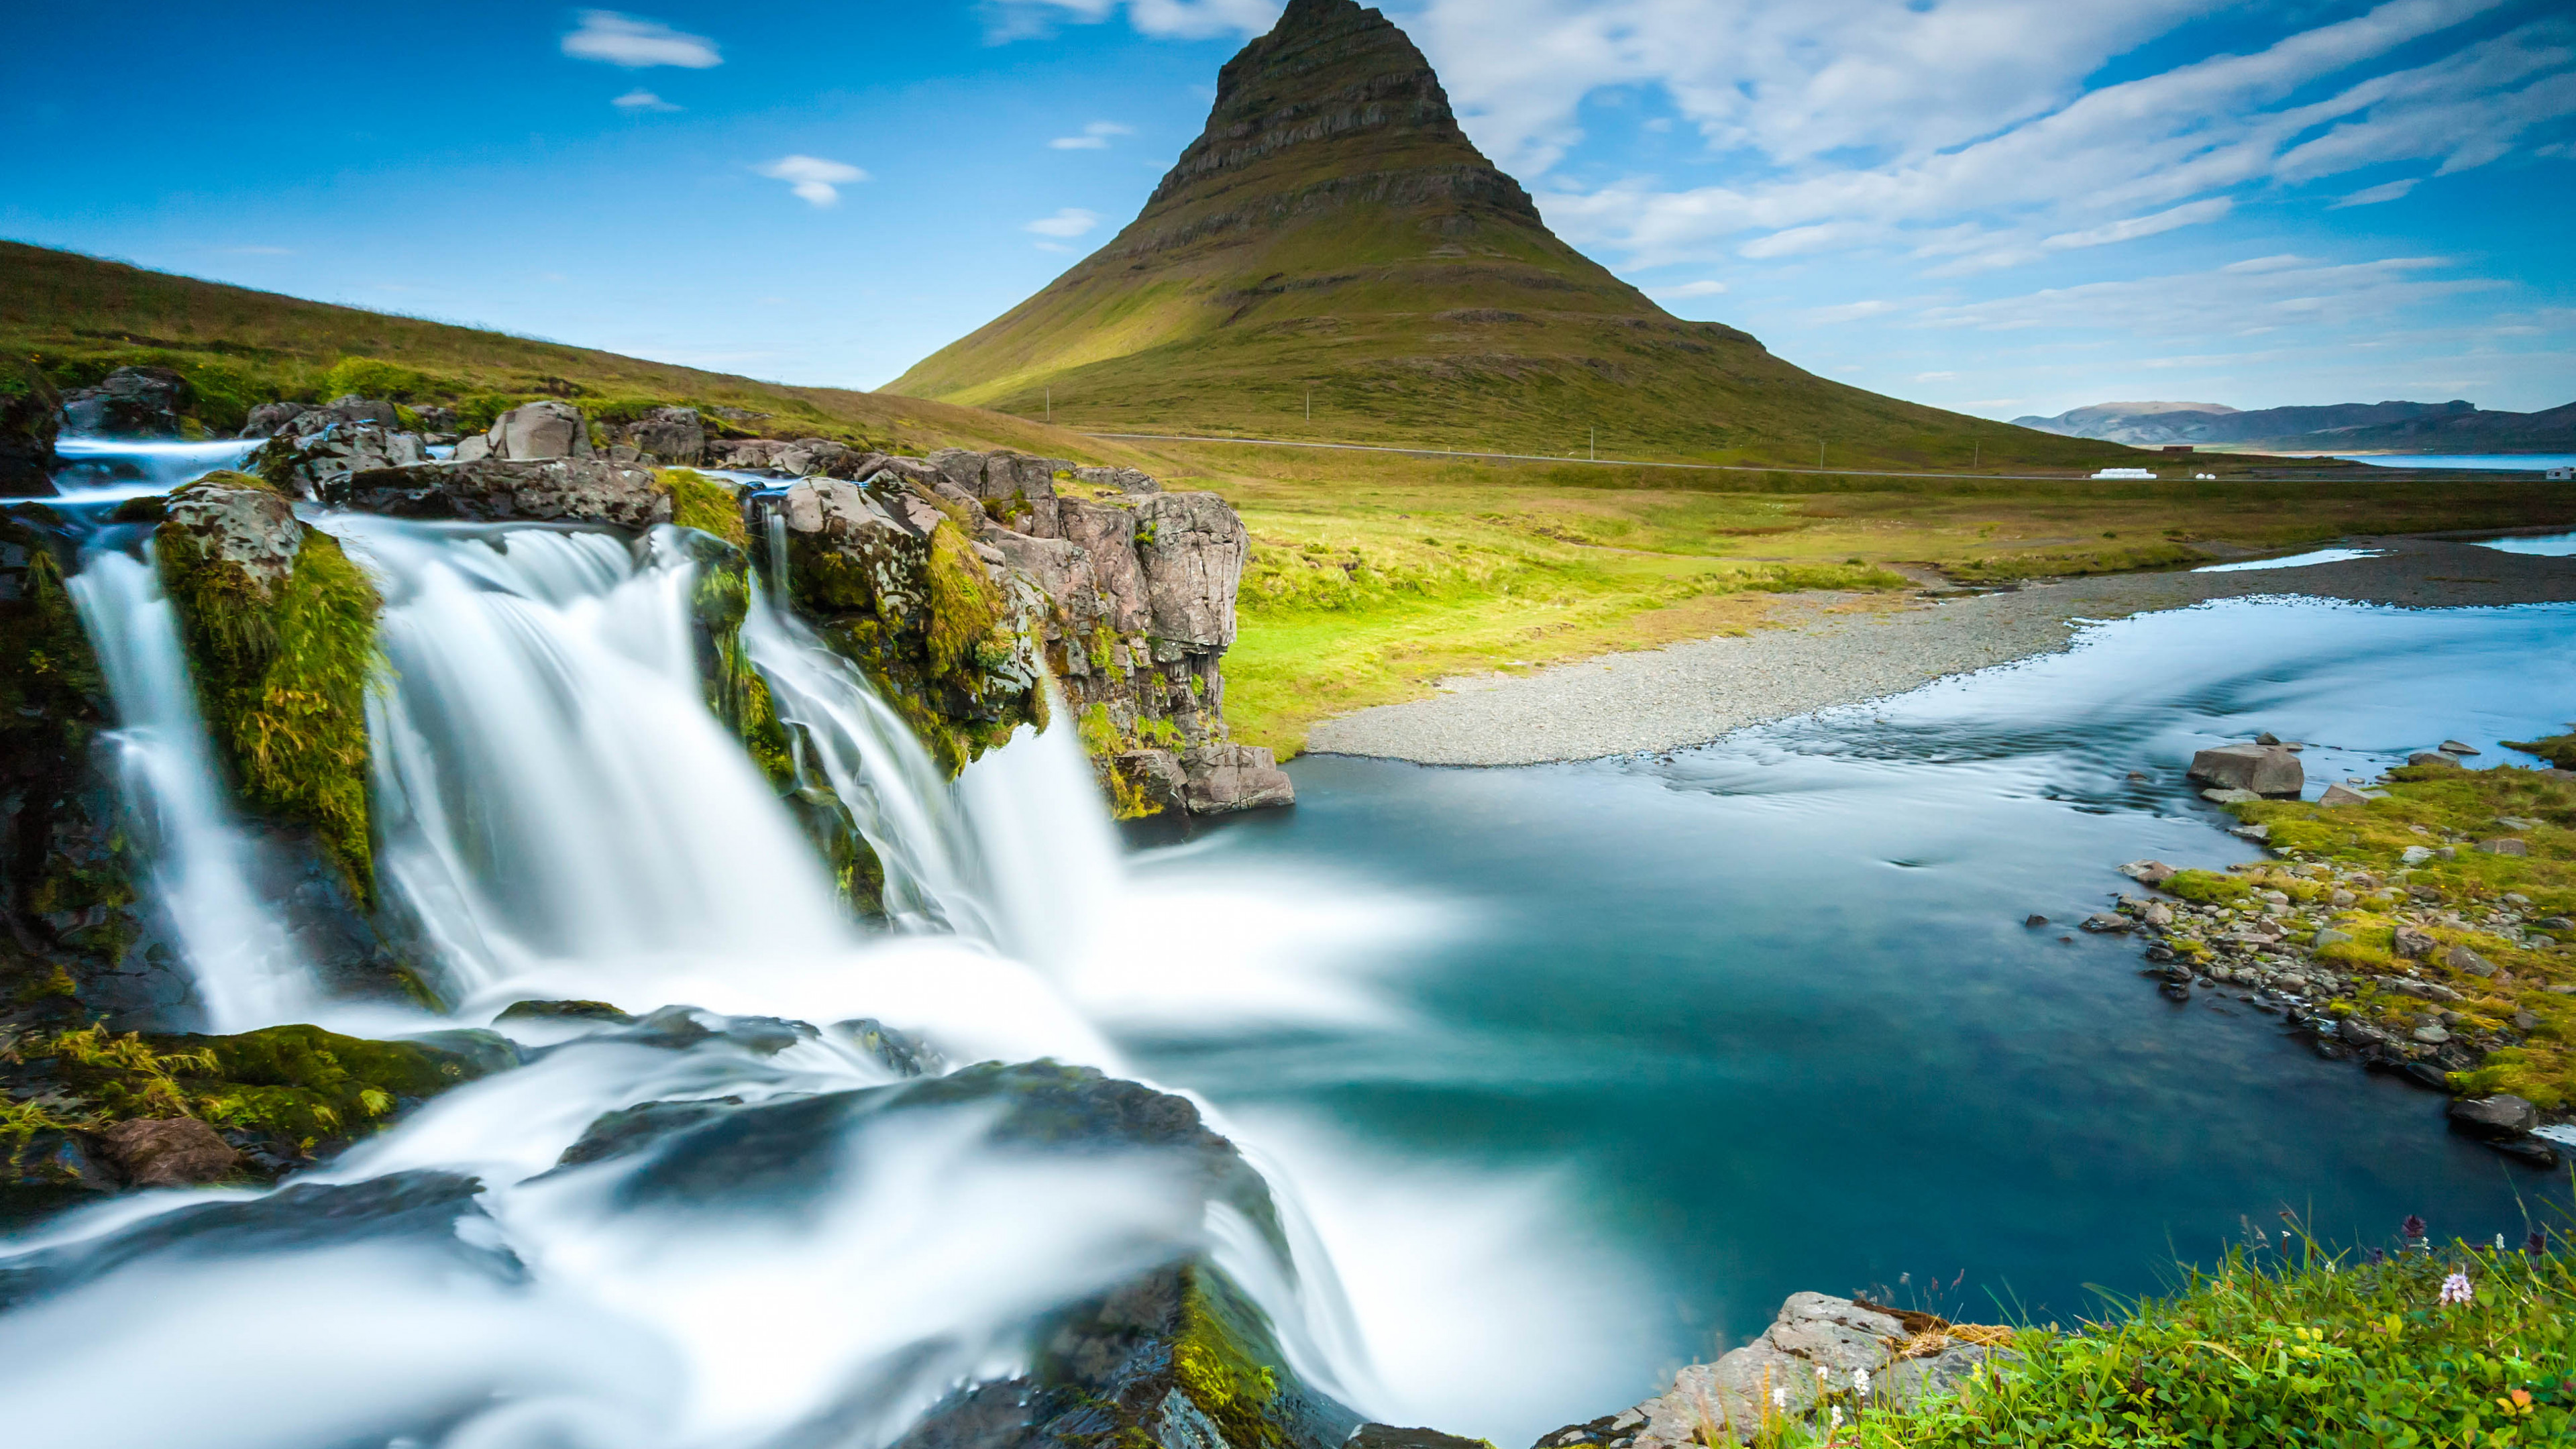 hd wallpapers 1920×1080 cars Iceland 4k reykjavik waterfall mountain river nature wallpapers